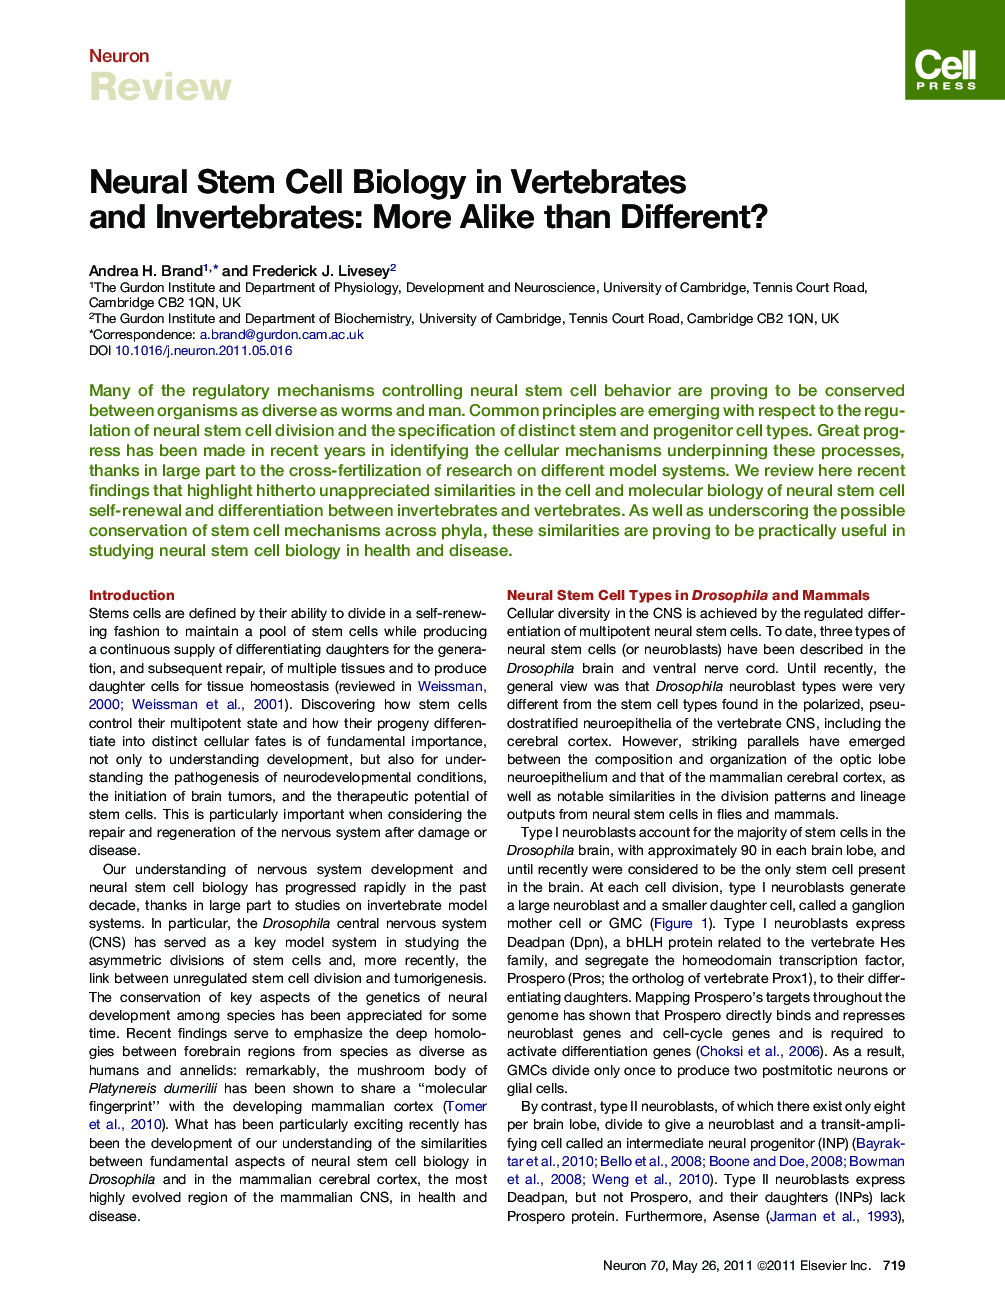 Neural Stem Cell Biology in Vertebrates and Invertebrates: More Alike than Different?